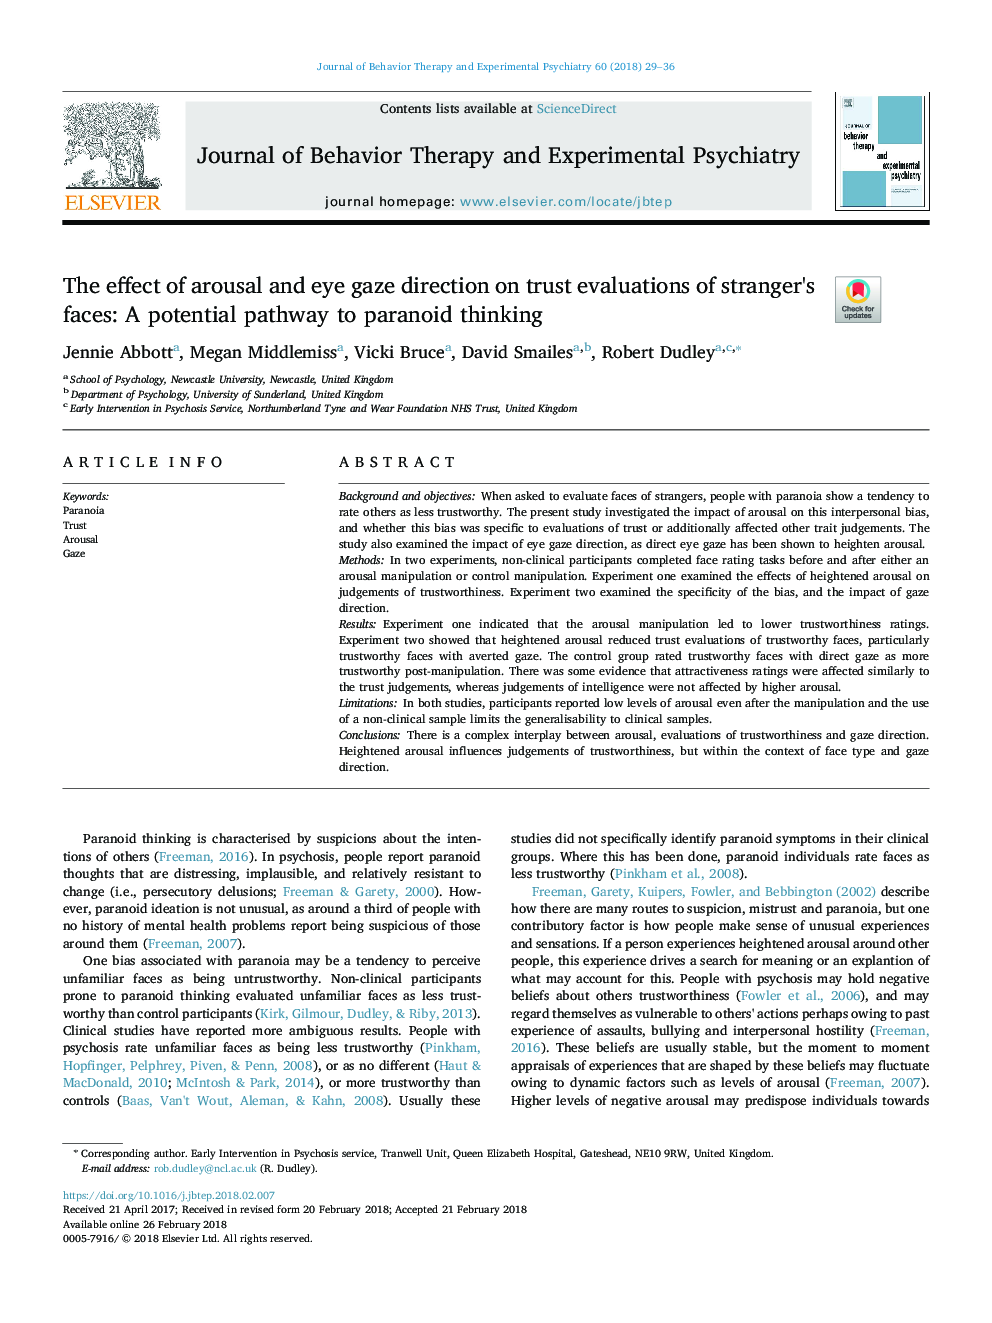 The effect of arousal and eye gaze direction on trust evaluations of stranger's faces: A potential pathway to paranoid thinking